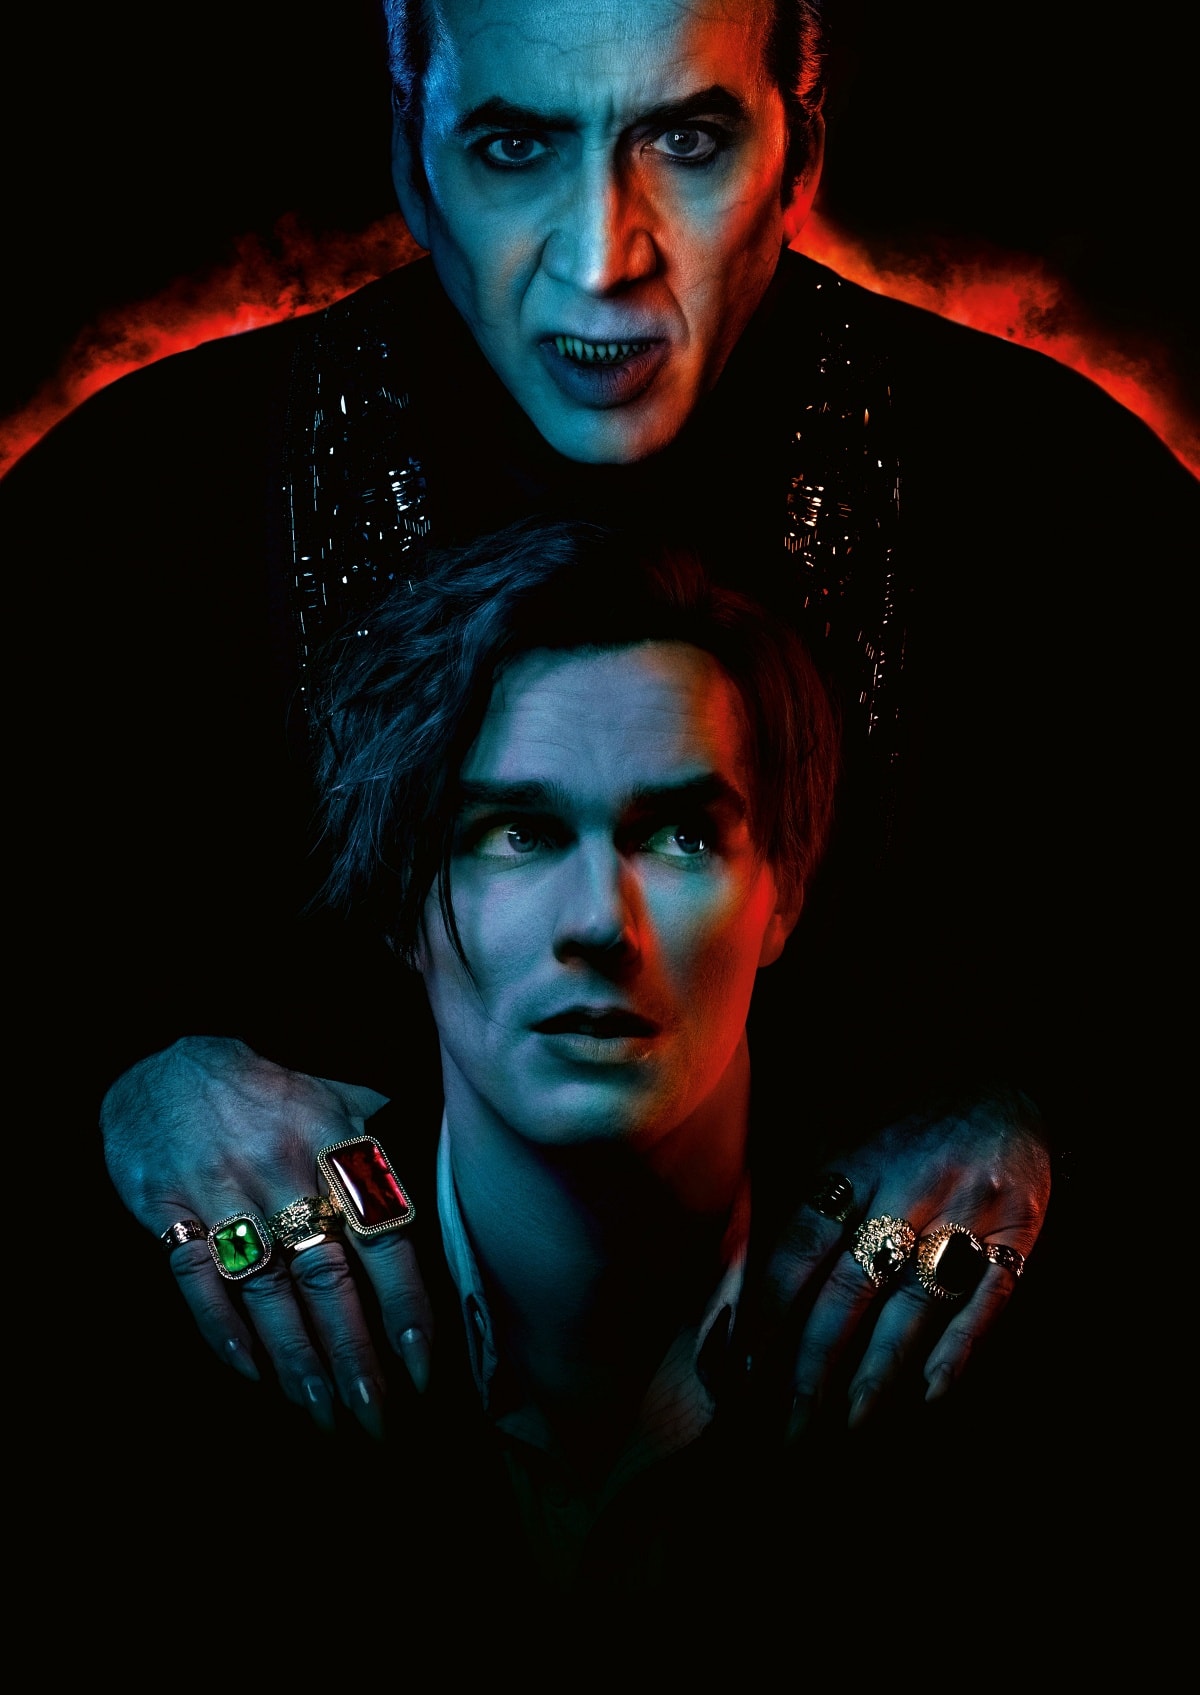 Promotional art for Renfield featuring Nicolas Cage as Count Dracula and Nicholas Hoult as R.M. Renfield